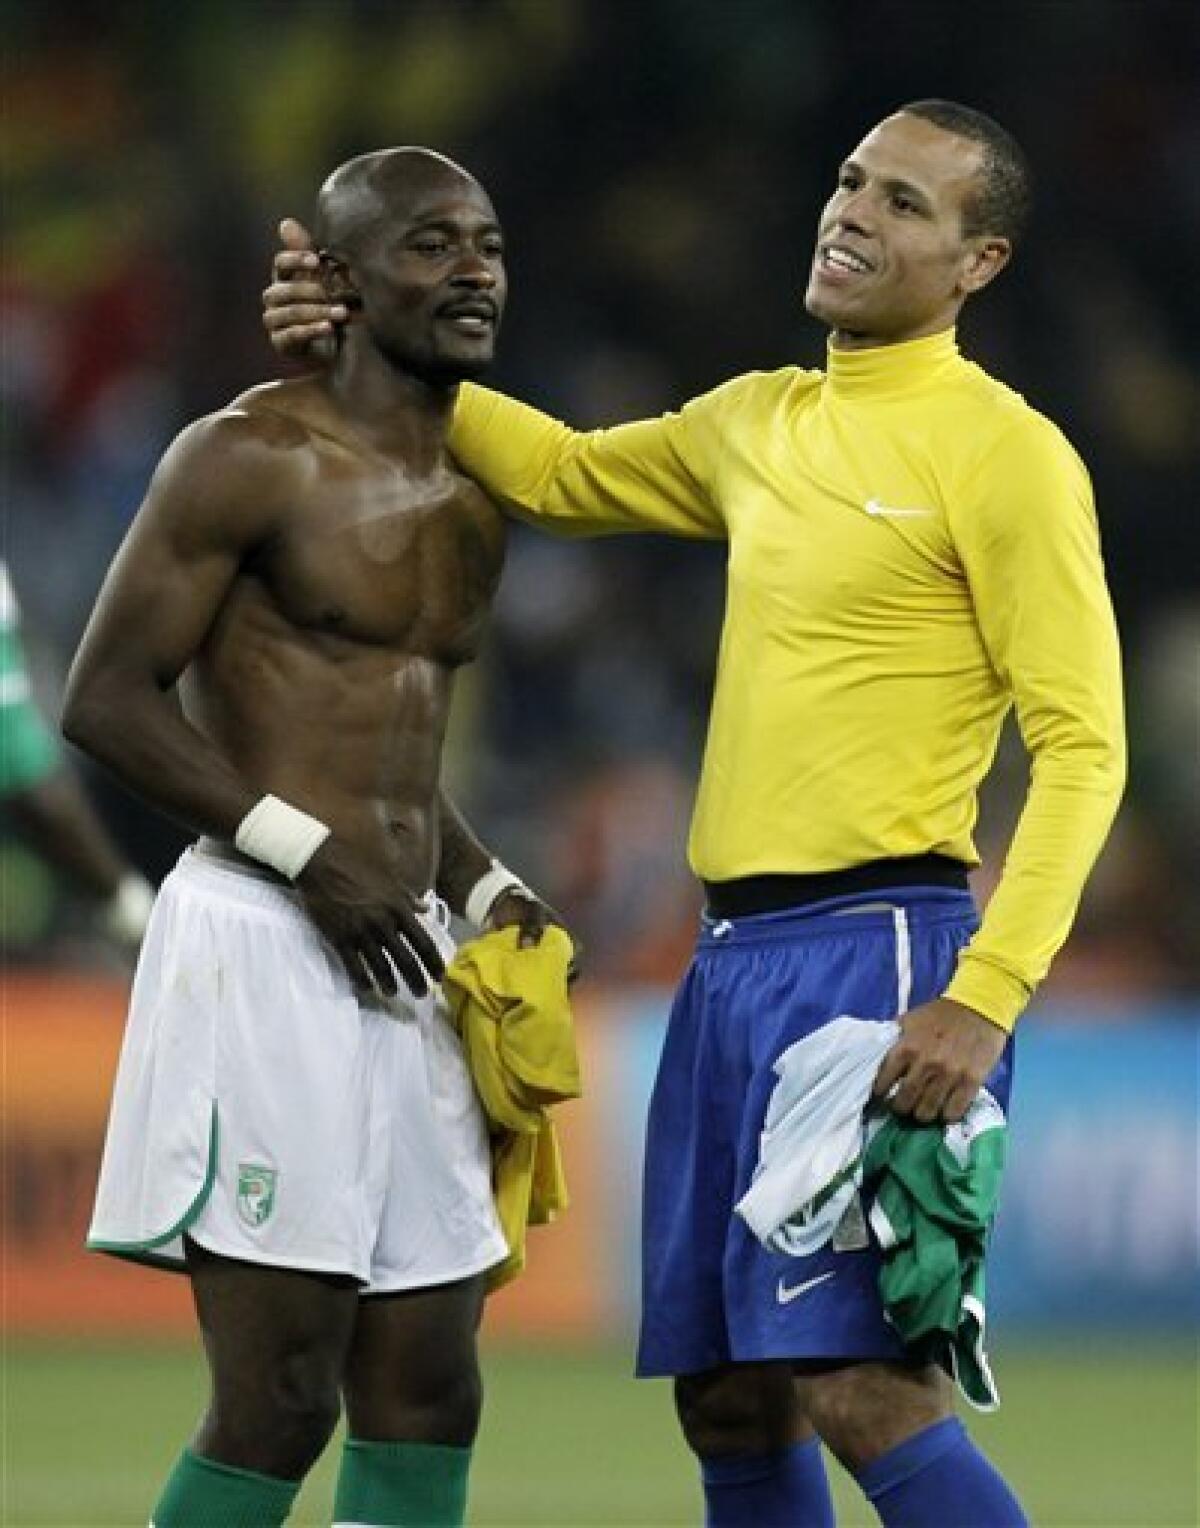 Ivory Coast's Didier Zokora, left, and Brazil's Luis Fabiano, right, embrace at the end of the World Cup group G soccer match between Brazil and Ivory Coast at Soccer City in Johannesburg, South Africa, Sunday, June 20, 2010. (AP Photo/Matt Dunham)